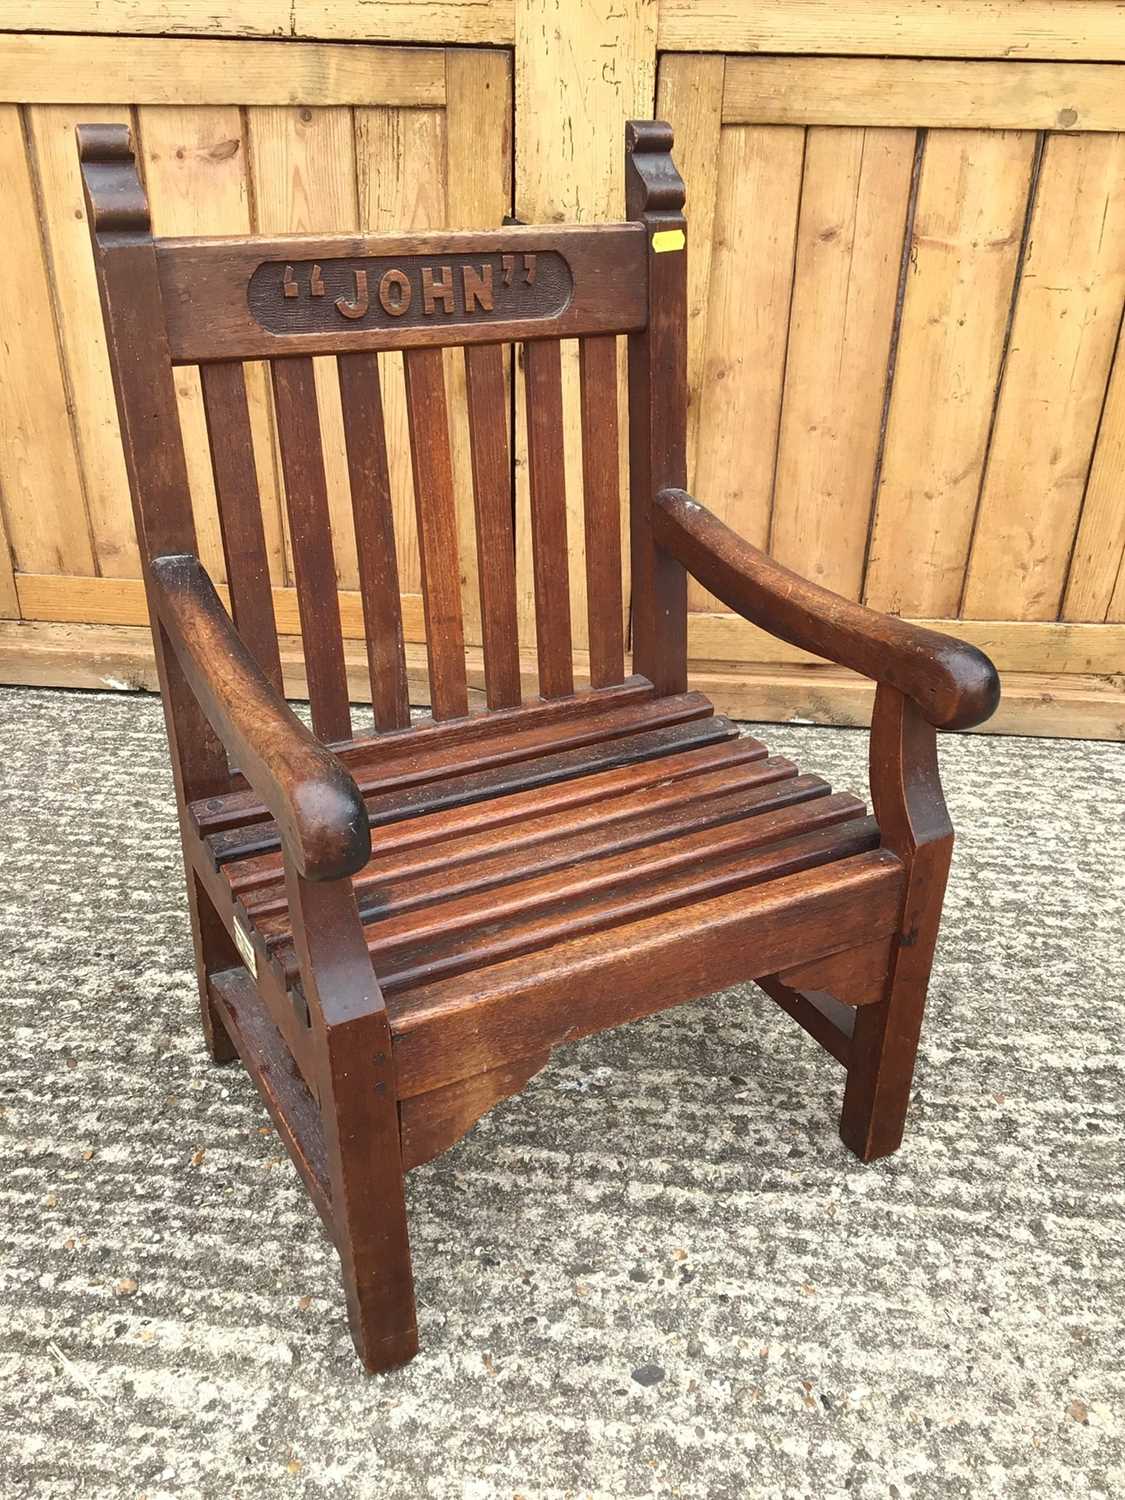 Lot 863 - Late Victorian child's chair, the top rail carved with the name "John", with plaque stating 'Made from timber removed from H.M.S. "Britannia", cadet training ship at Dartmouth 1869-1905'